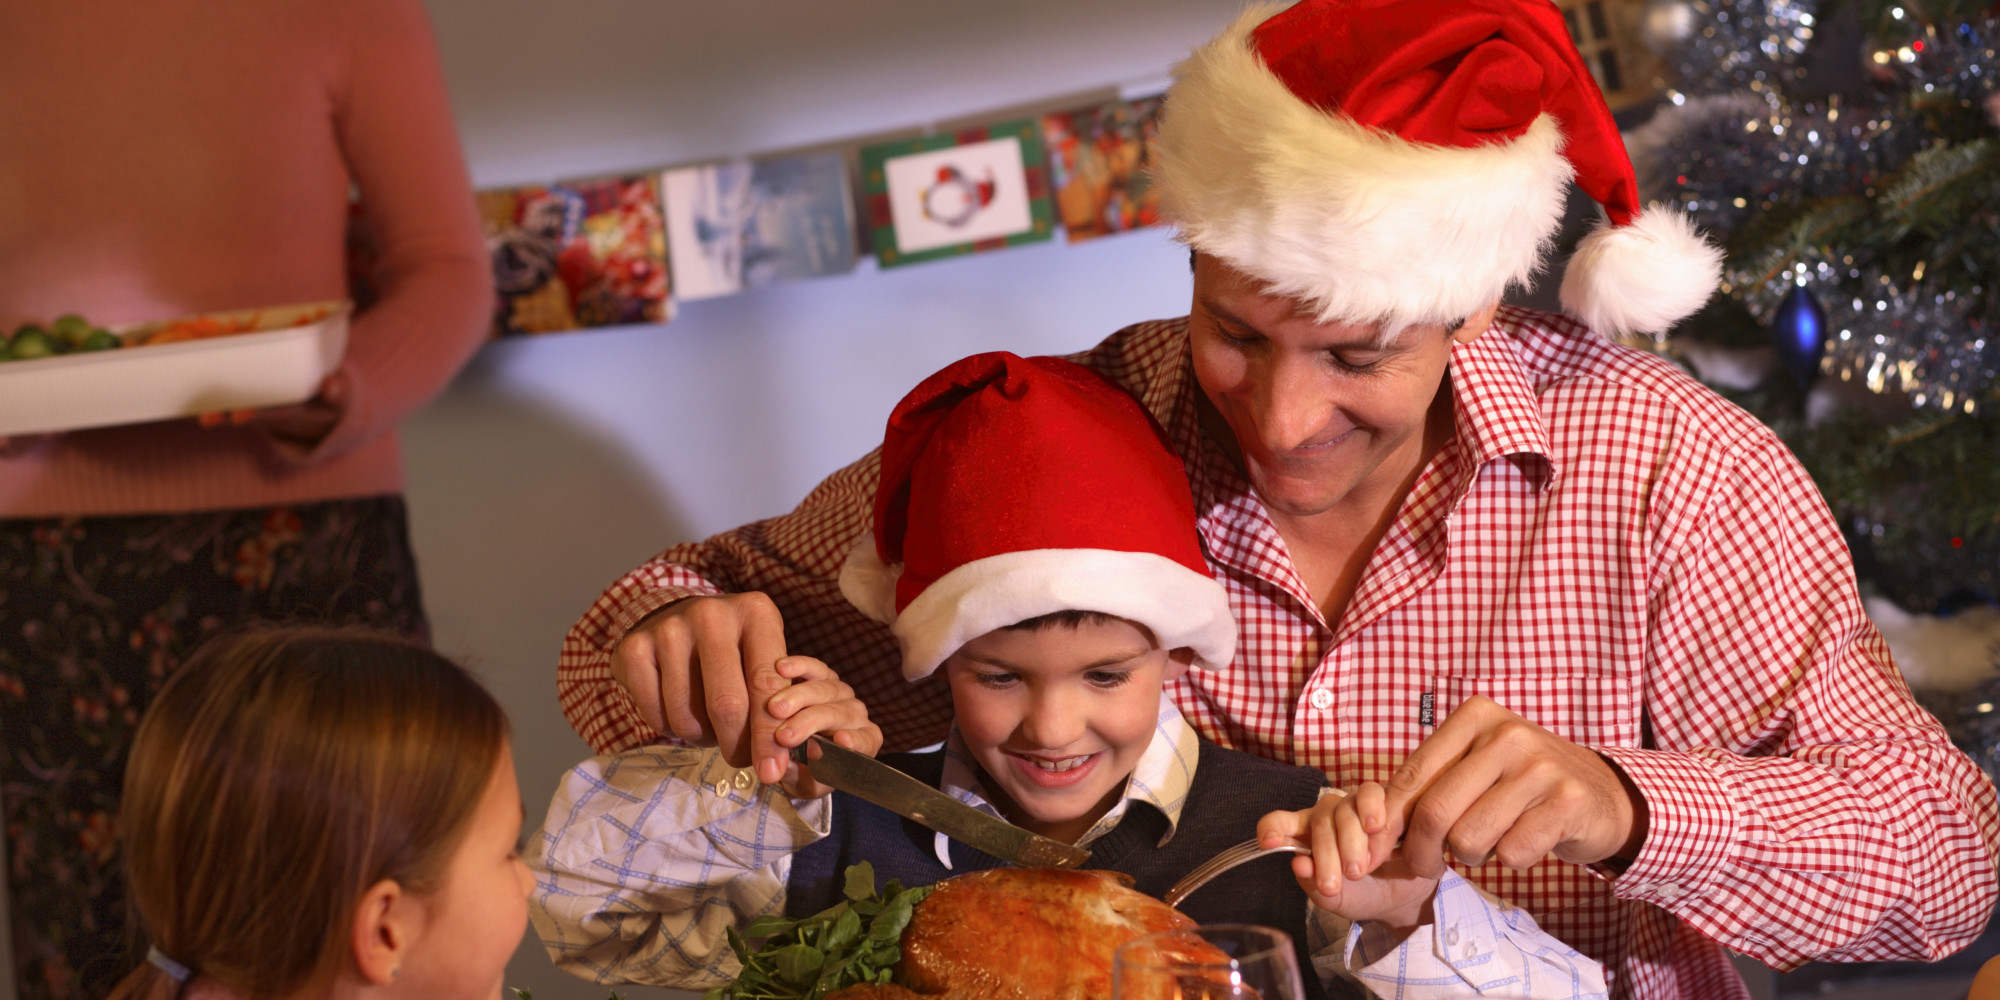 What Christmas Dinner Is Like, According To Stock Photos | HuffPost